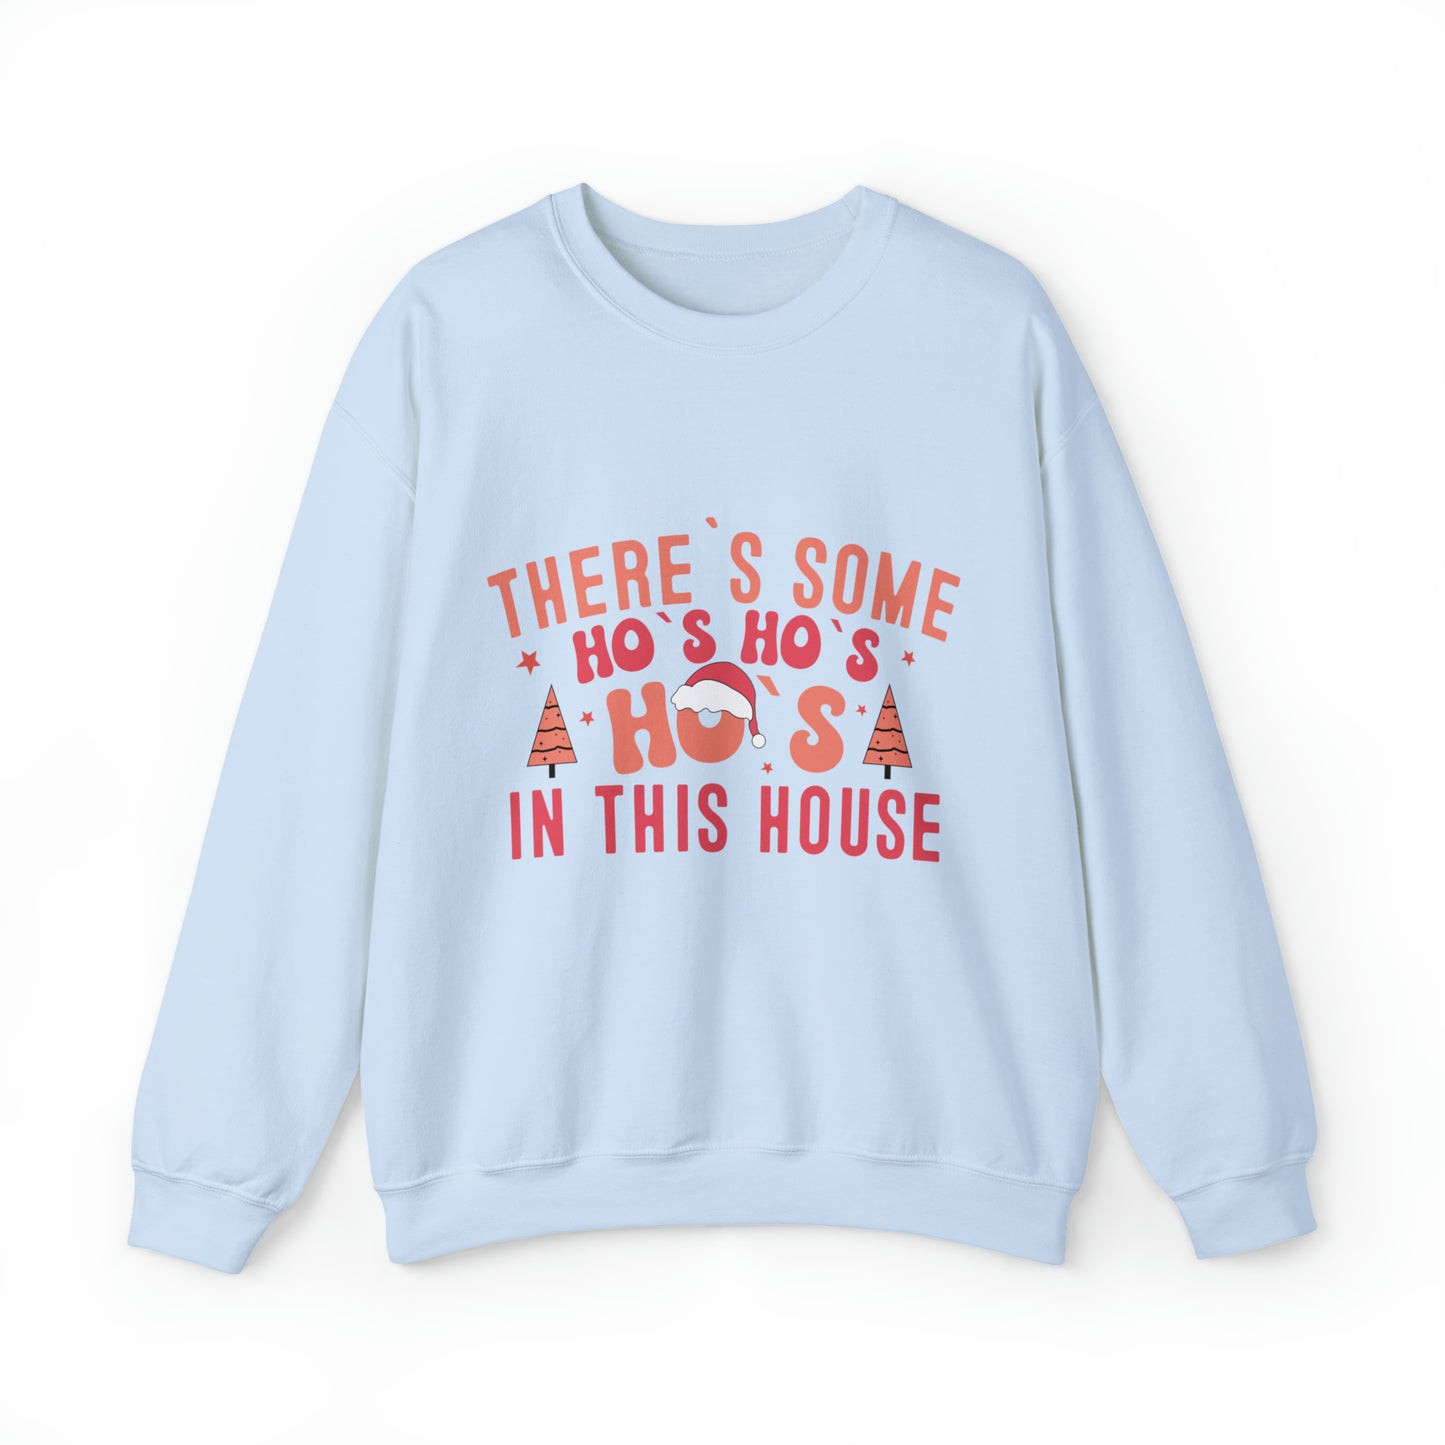 There's some HoHoHos in the house Women's funny Christmas humor Crewneck Sweatshirt